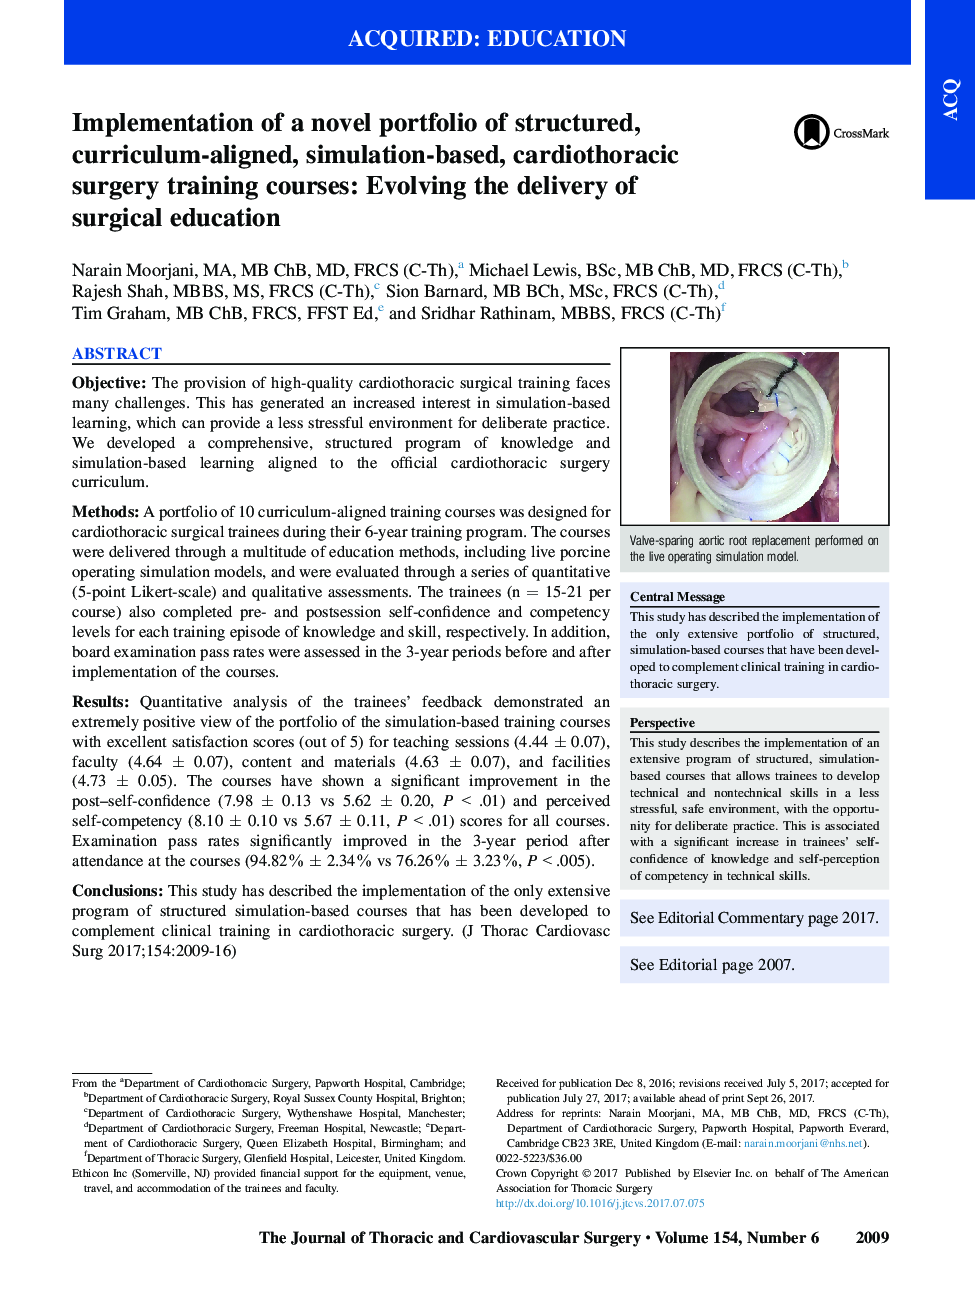 Implementation of a novel portfolio of structured, curriculum-aligned, simulation-based, cardiothoracic surgery training courses: Evolving the delivery of surgical education